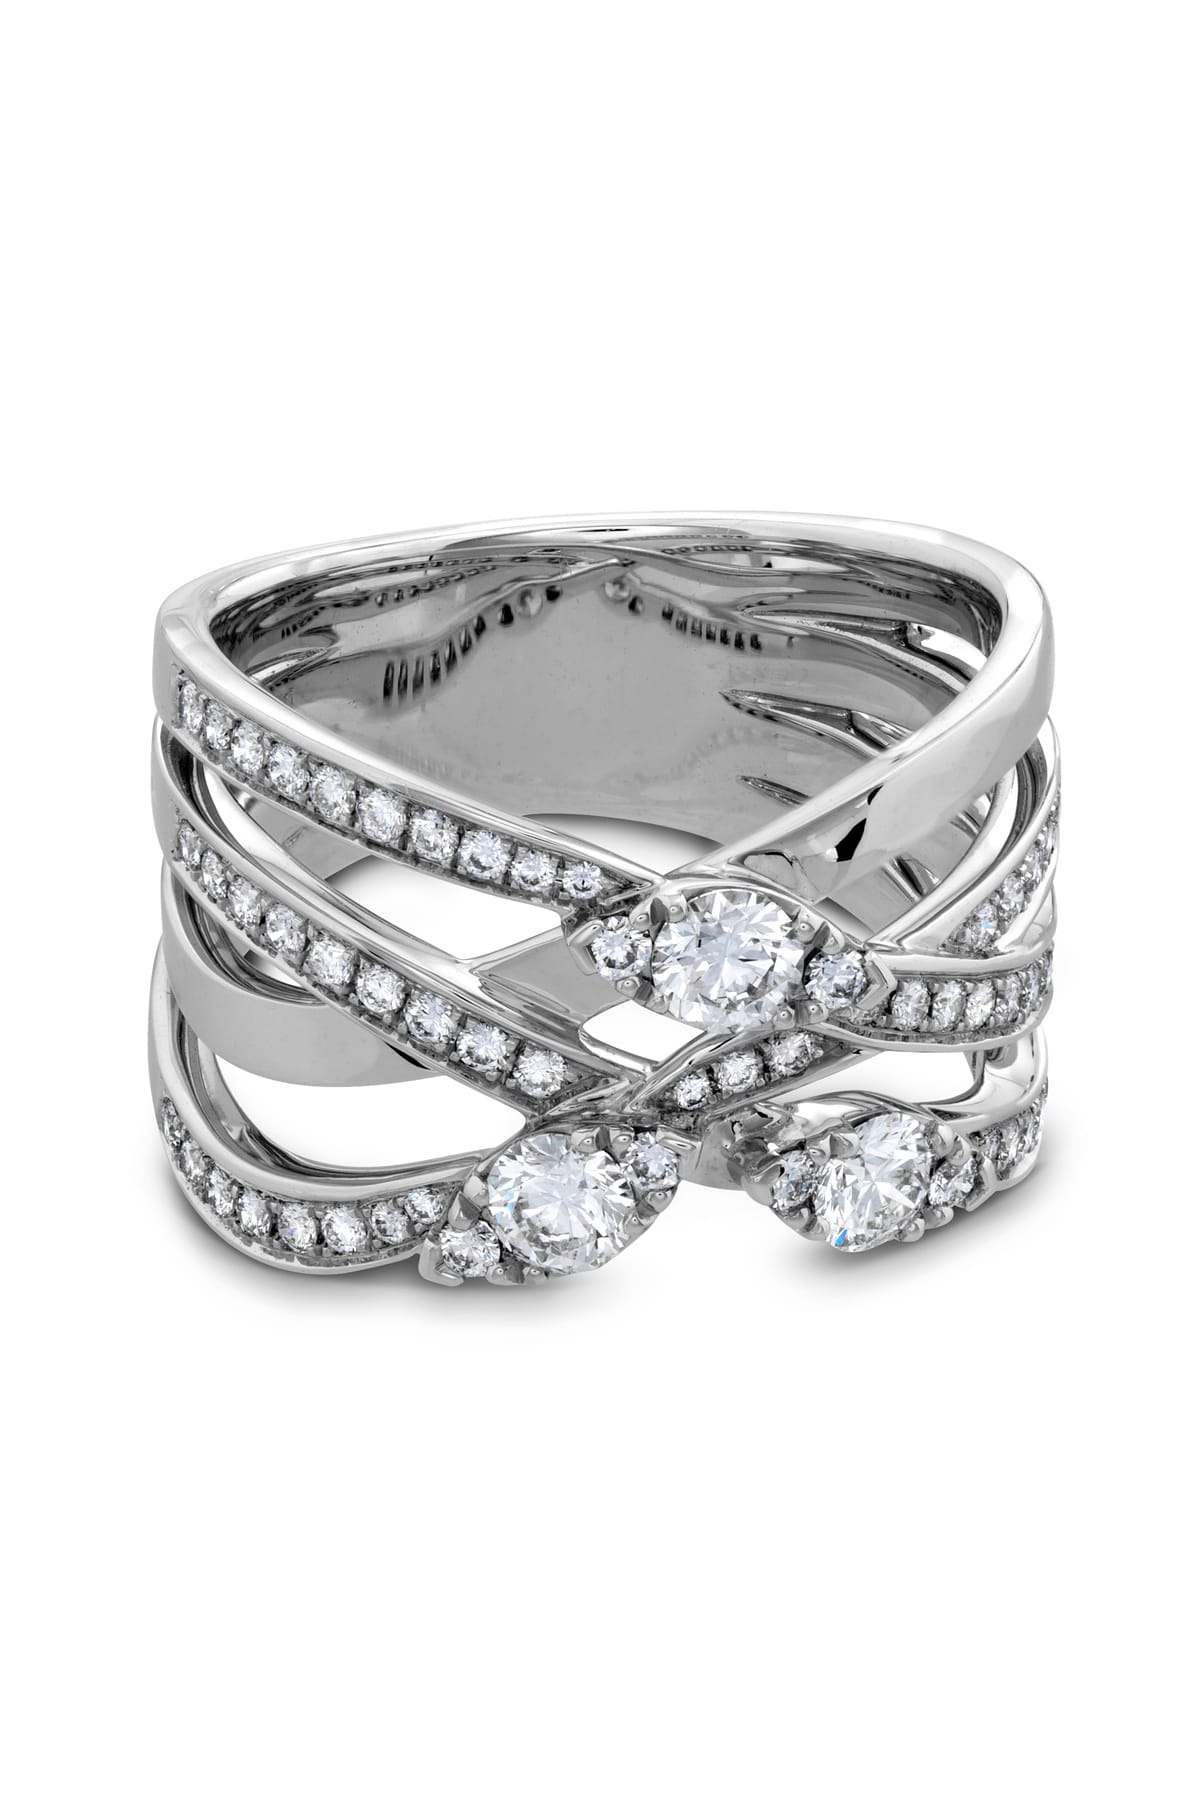 Aerial Diamond Right Hand Ring From Hearts On Fire available at LeGassick Diamonds and Jewellery Gold Coast, Australia.